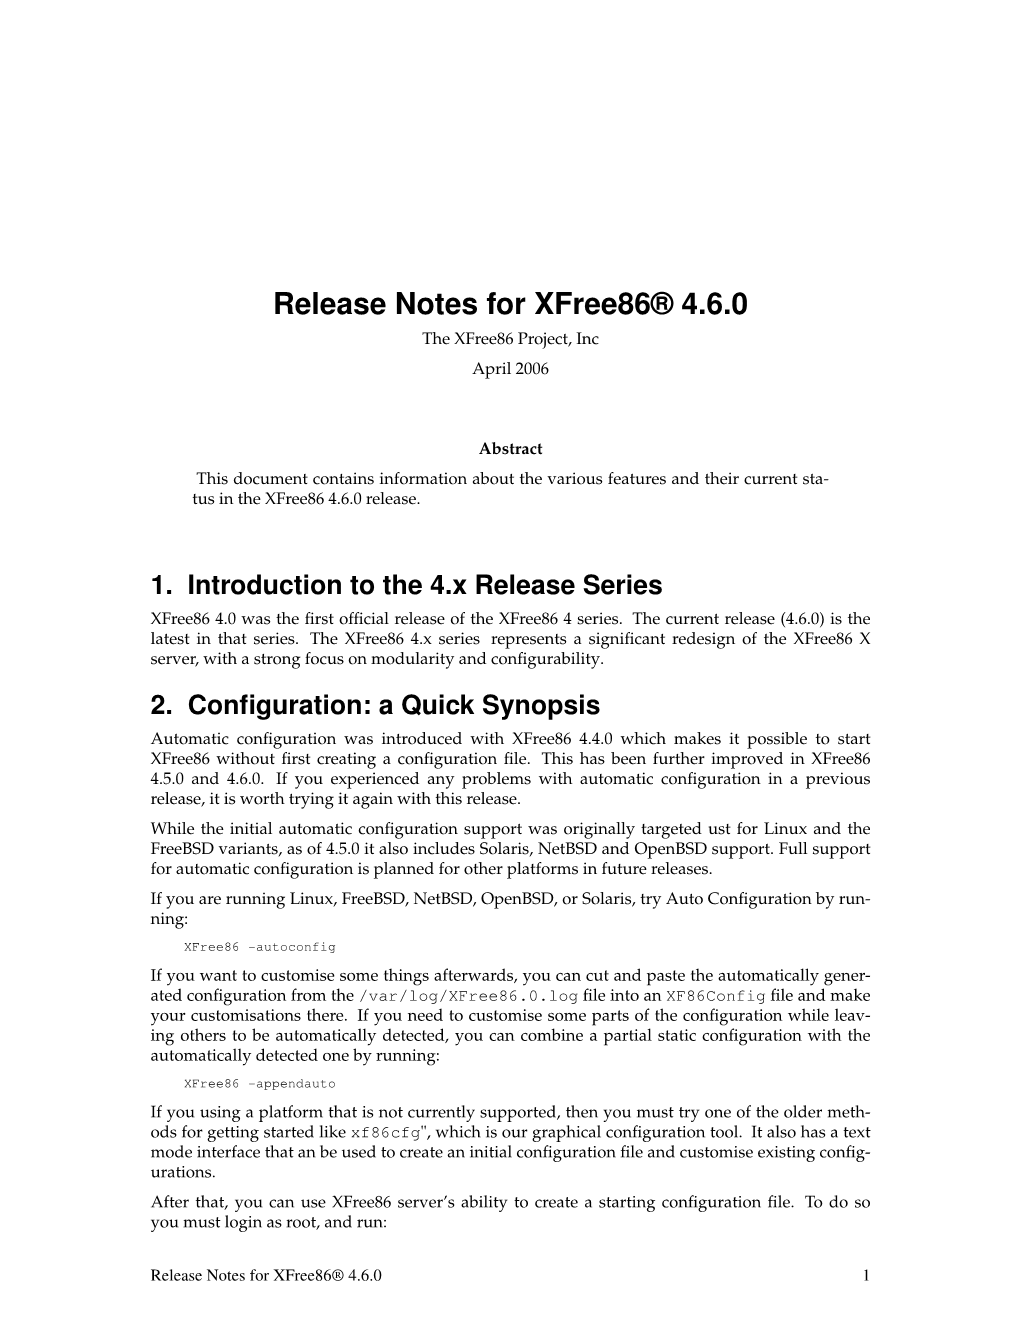 Release Notes for Xfree86® 4.6.0 the Xfree86 Project, Inc April 2006